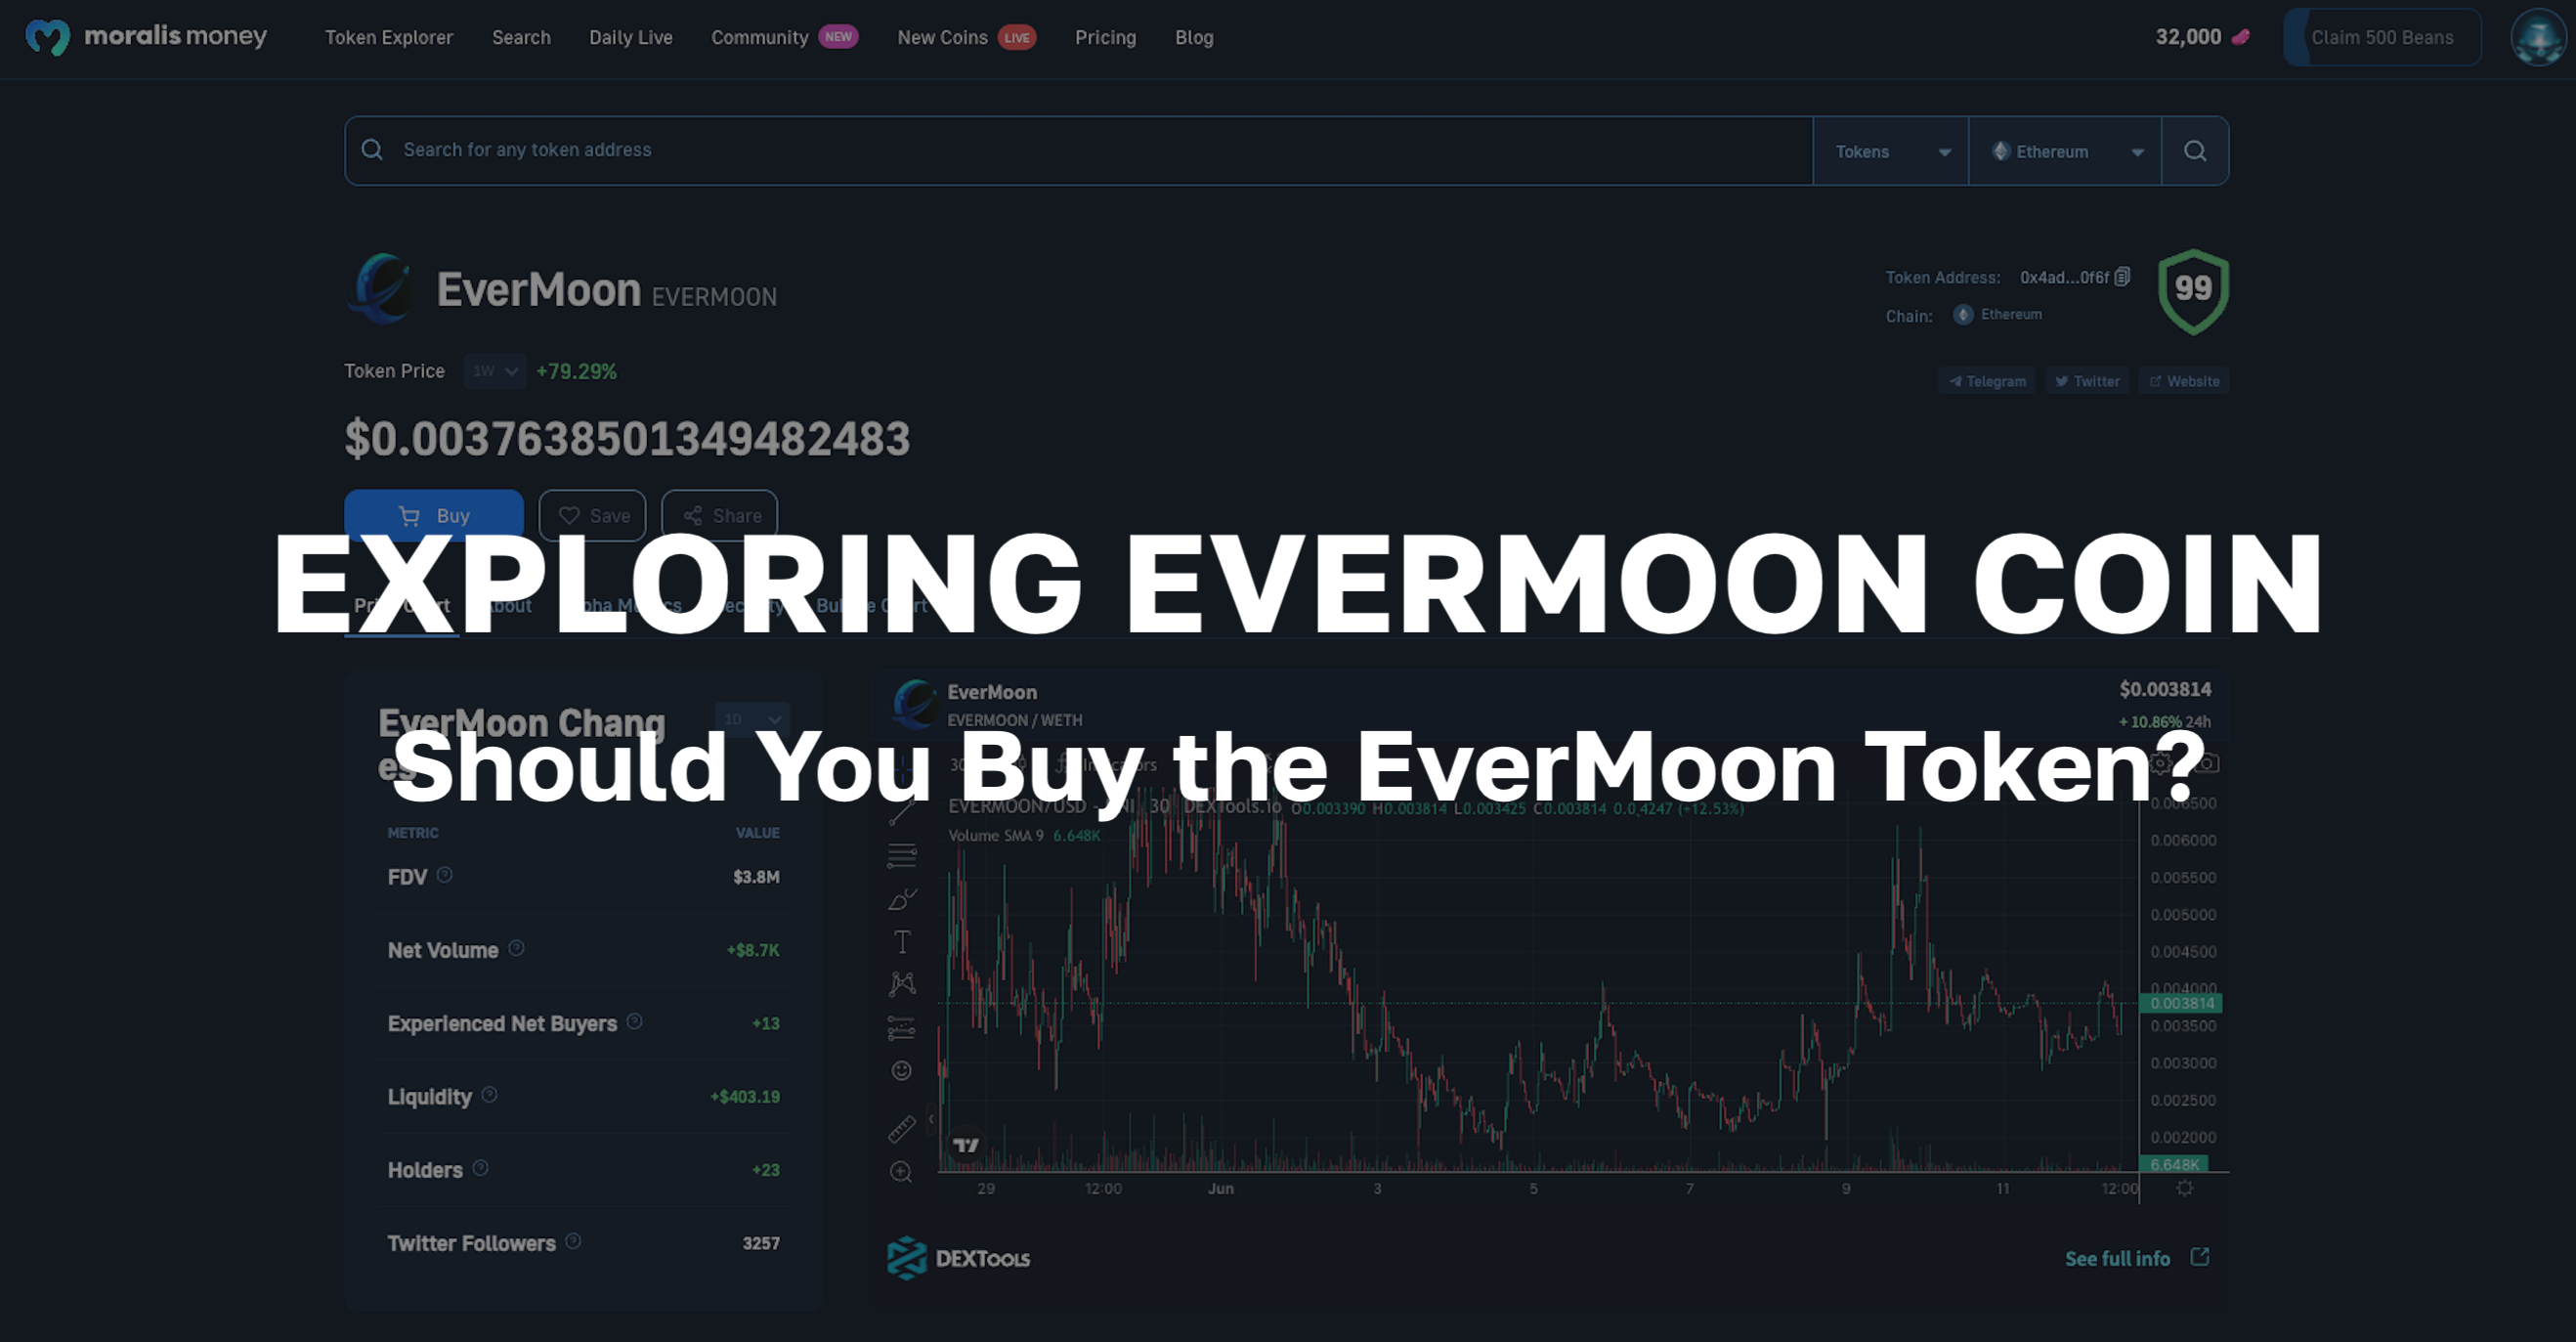 EXPLORING EVERMOON COIN and If You Should Buy It